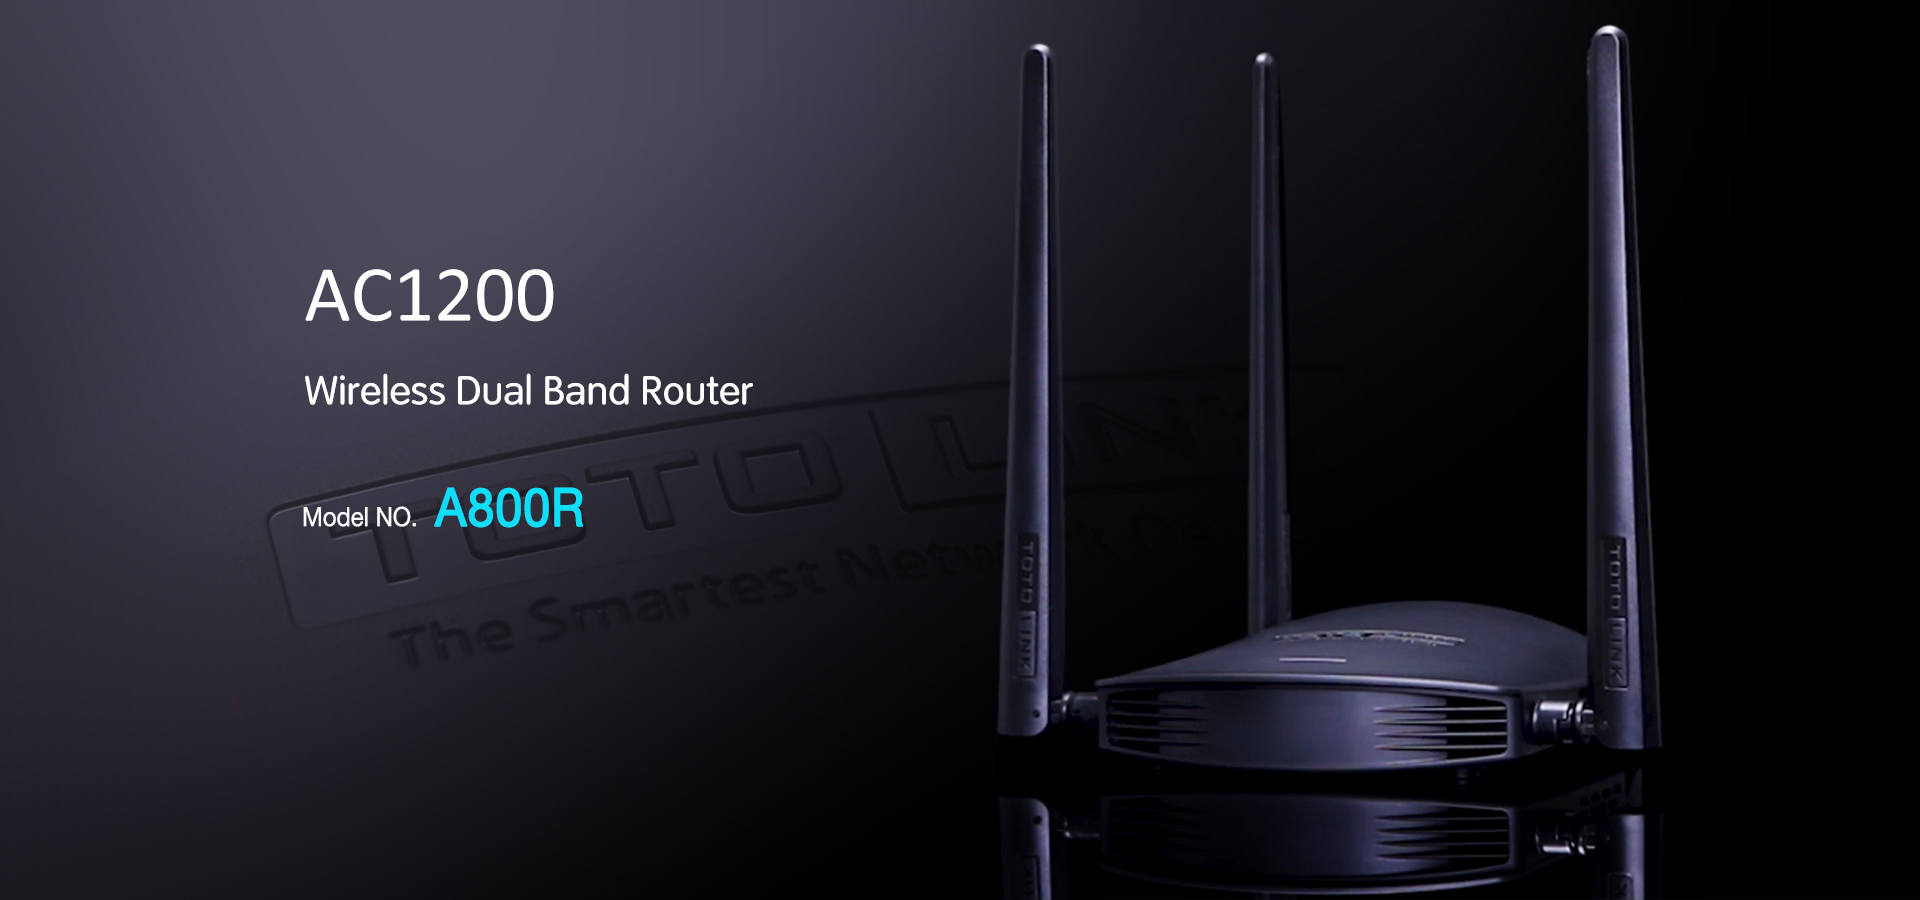 A800R AC1200 Wireless Dual Band Router